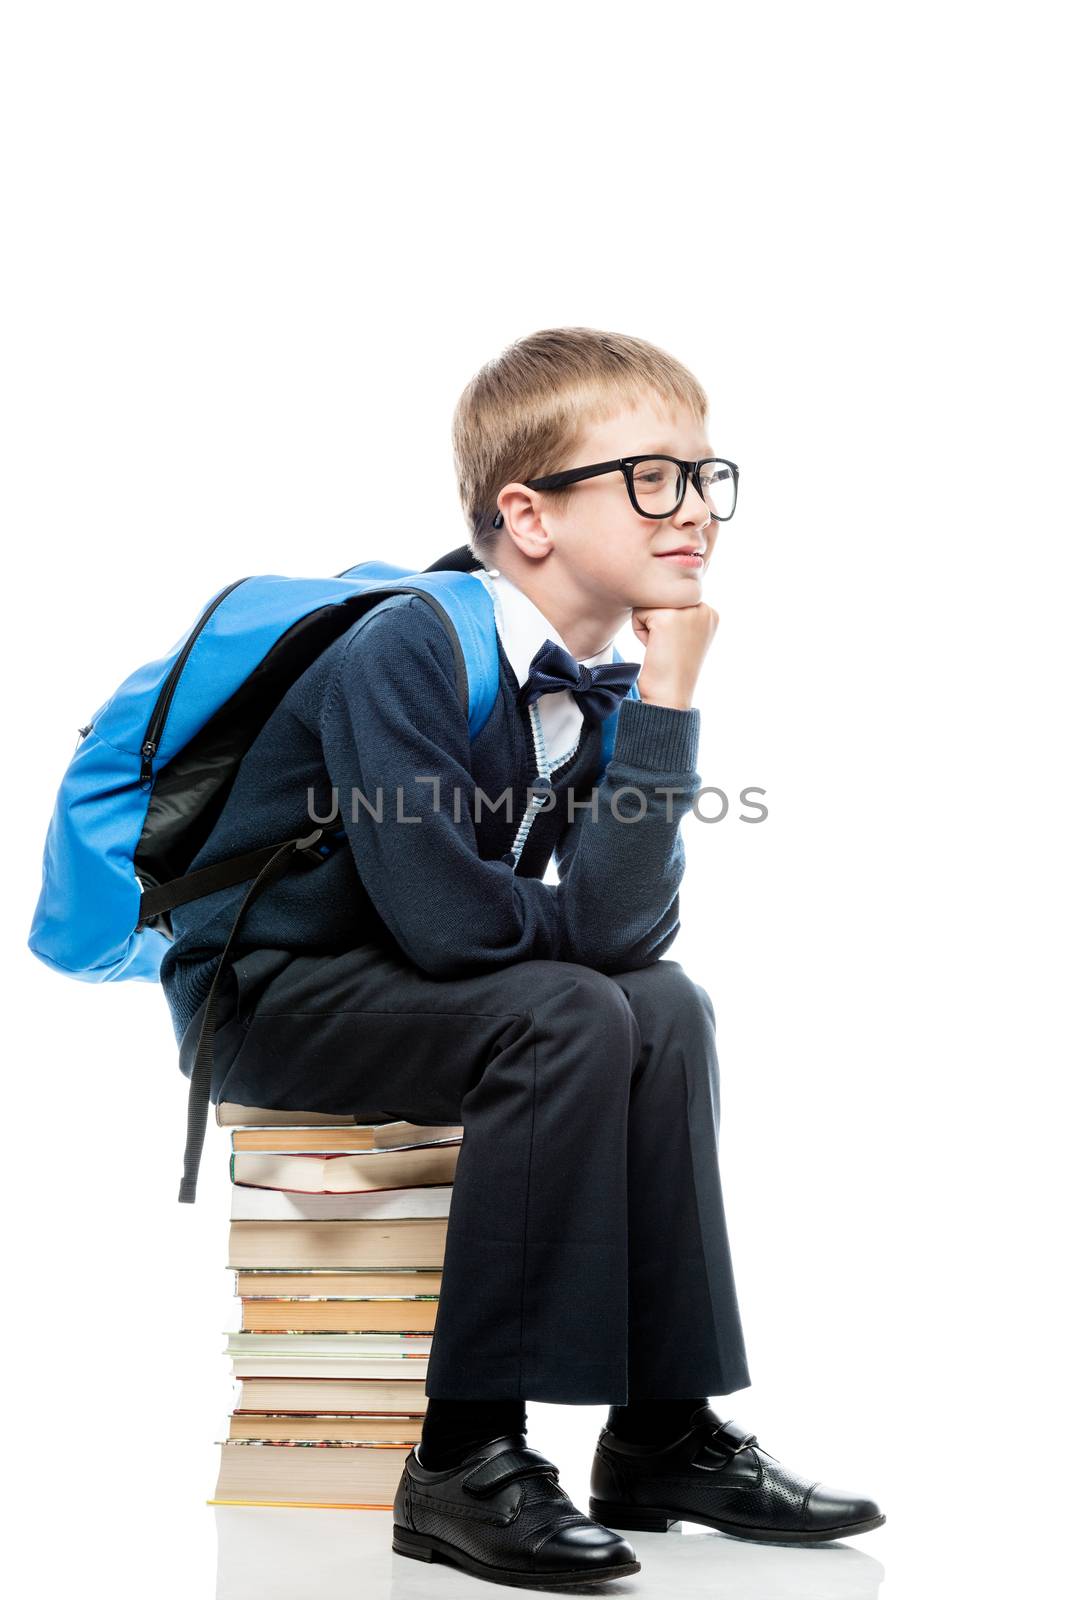 thoughtful schoolboy sitting on a pile of books on a white background